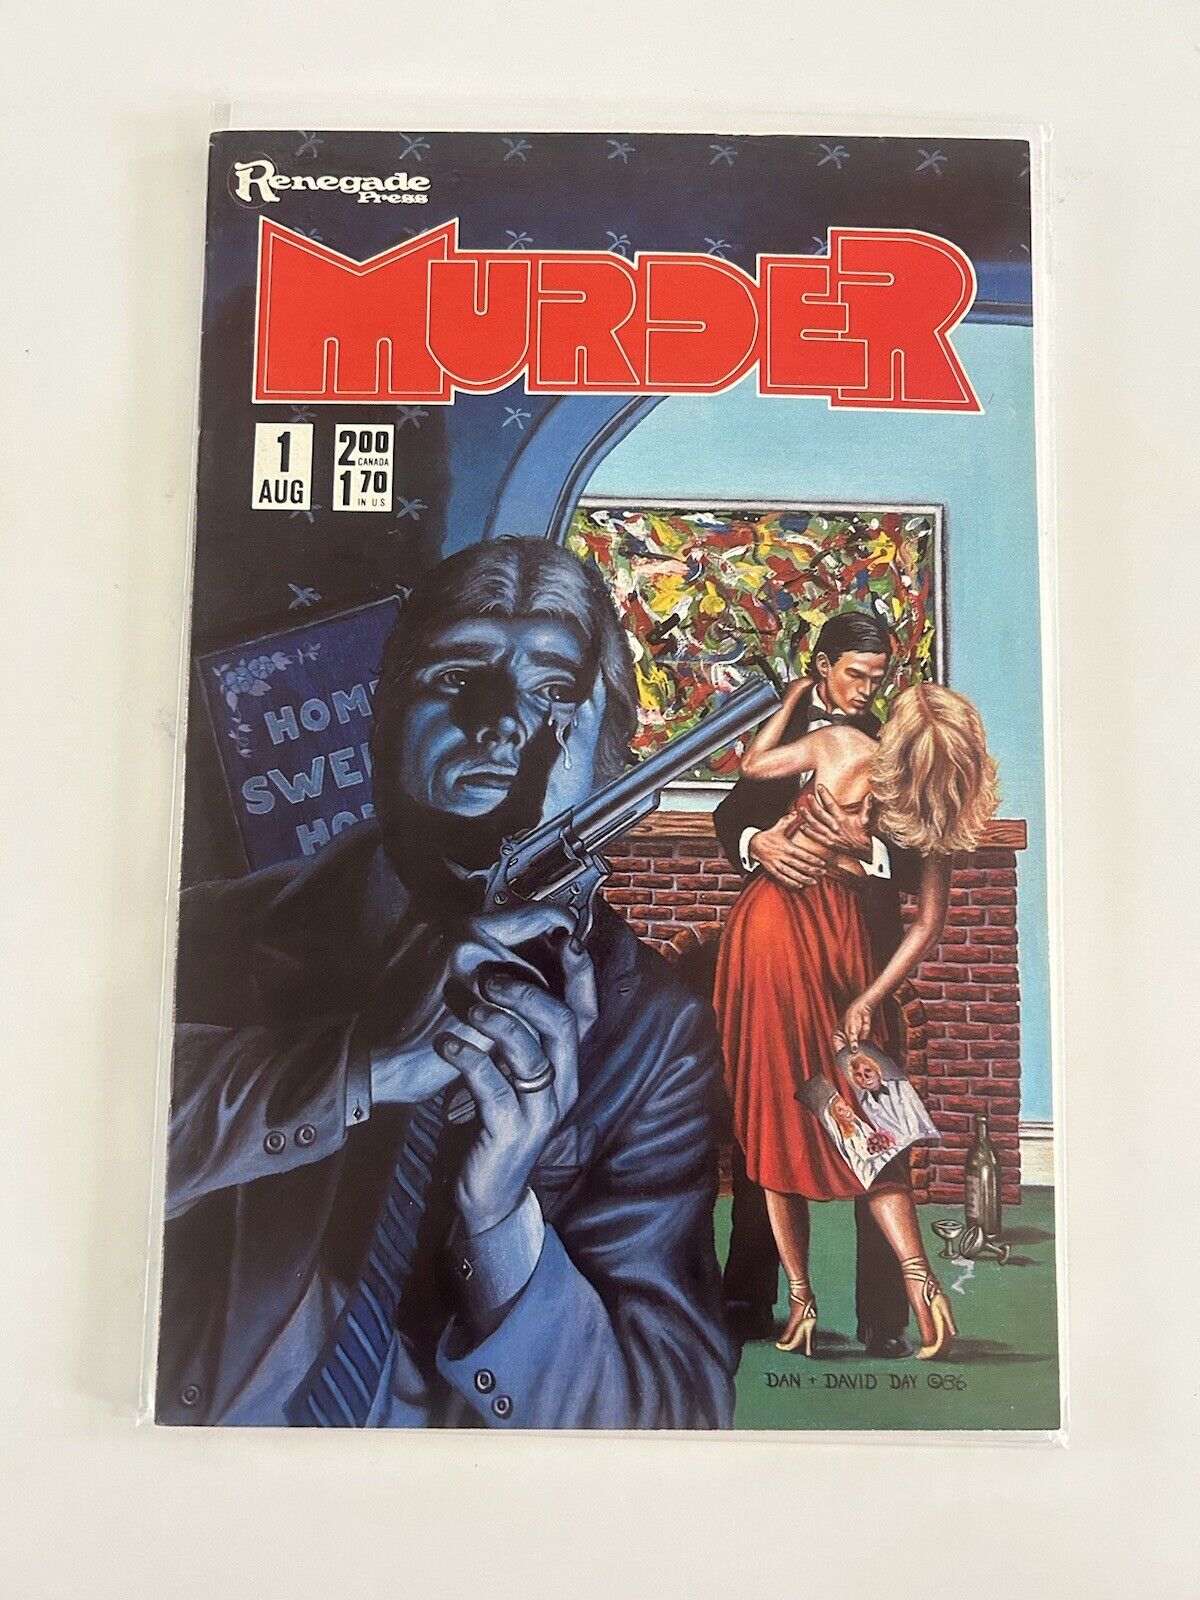 Murder #1 Renegade Press Comics August 1986 Combined Shipping Offered